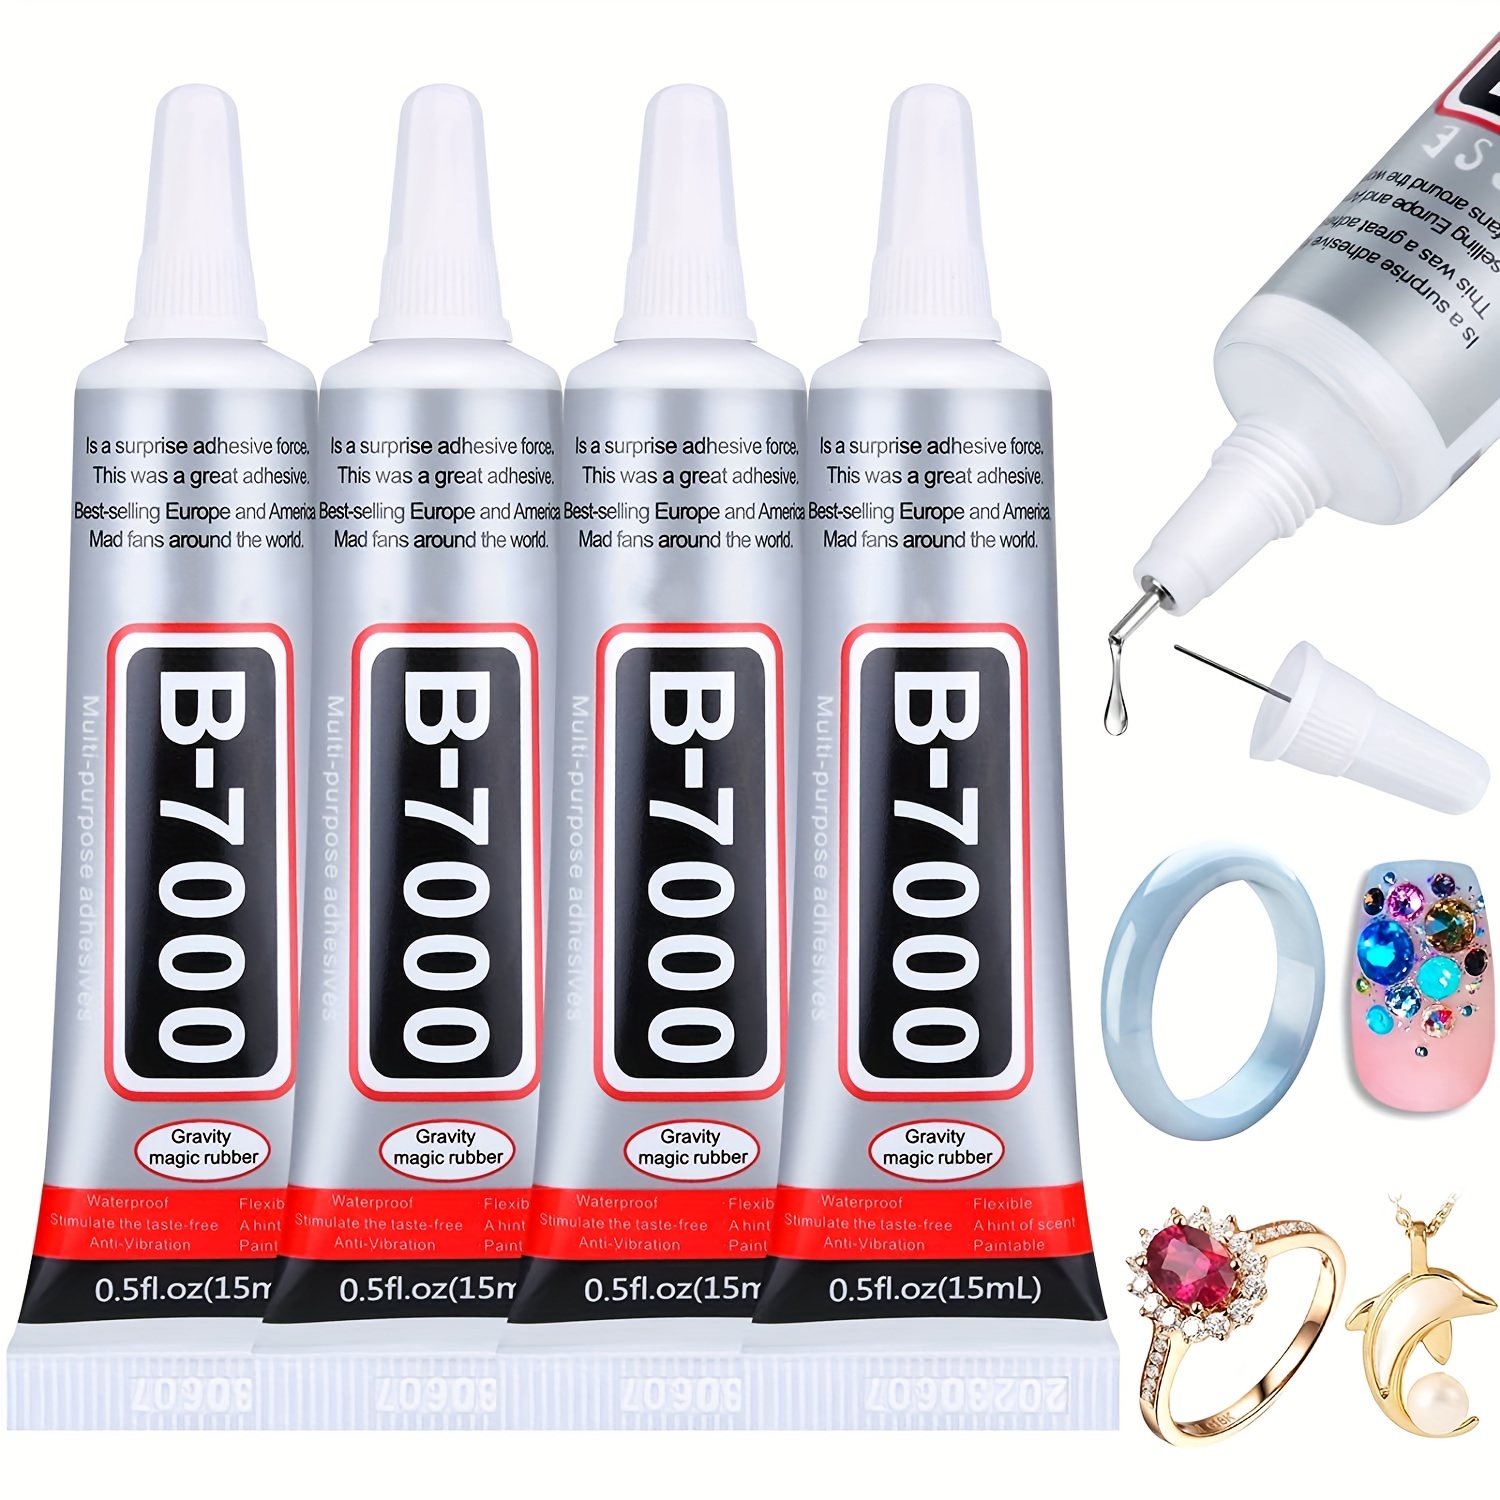 T-6000 Adhesive Multi-function Glues with Precision Tip for Jewelry Making Super Adhesive 110ml, Size: 110 ml